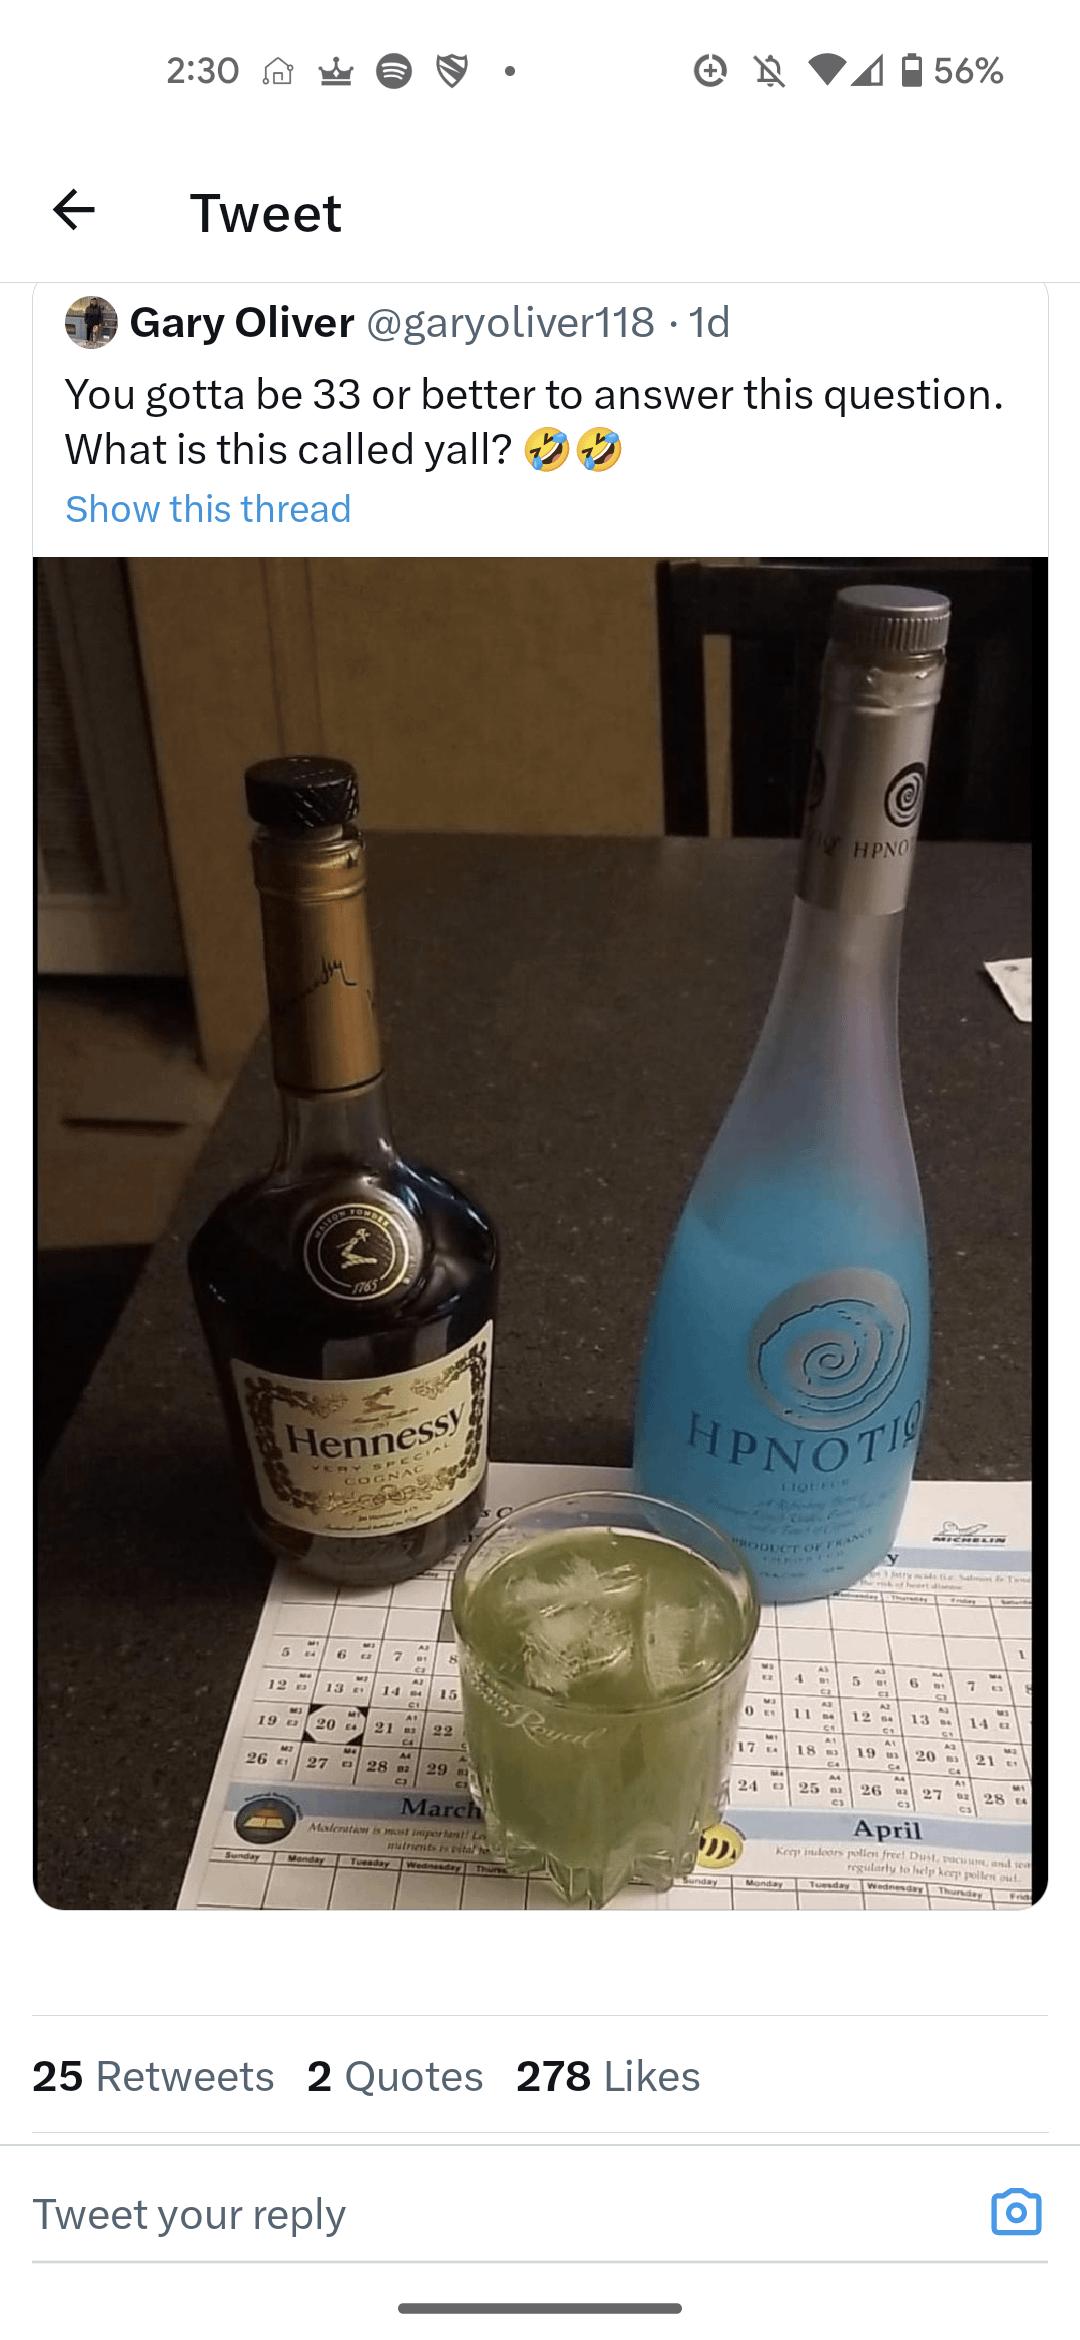 funny tweets - liqueur - Hennesst Tweet Gary Oliver You gotta be 33 or better to answer this question. What is this called yall? >> Show this thread Tweet your Hipnot 25 2 Quotes 278 56% 10